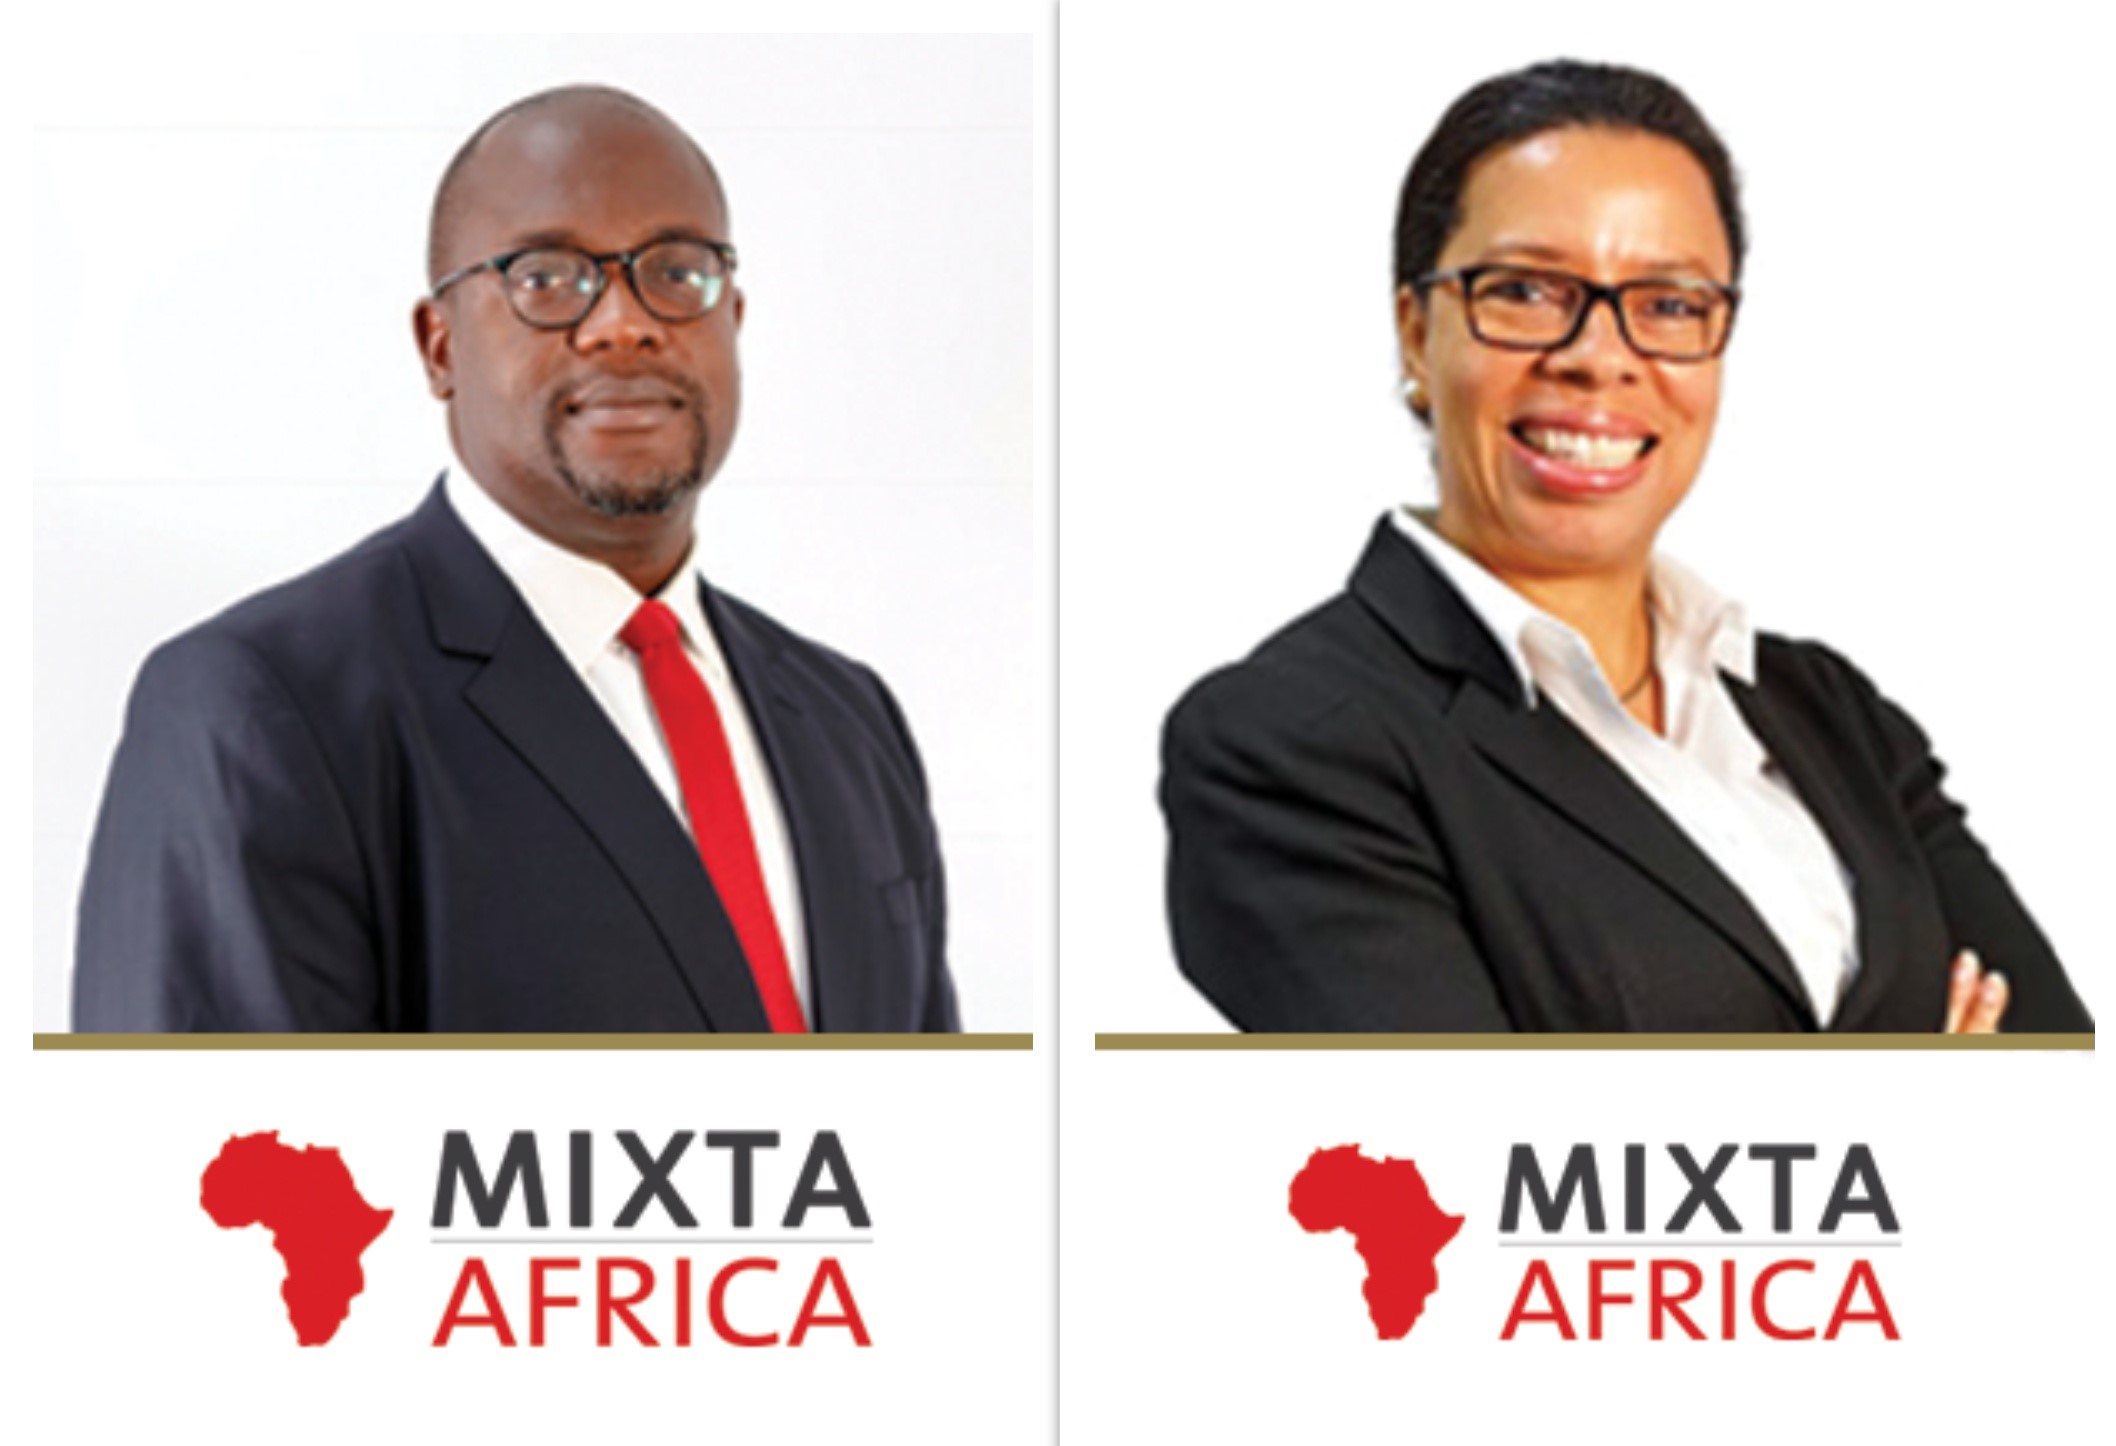 Mixta Africa announces two new appointments